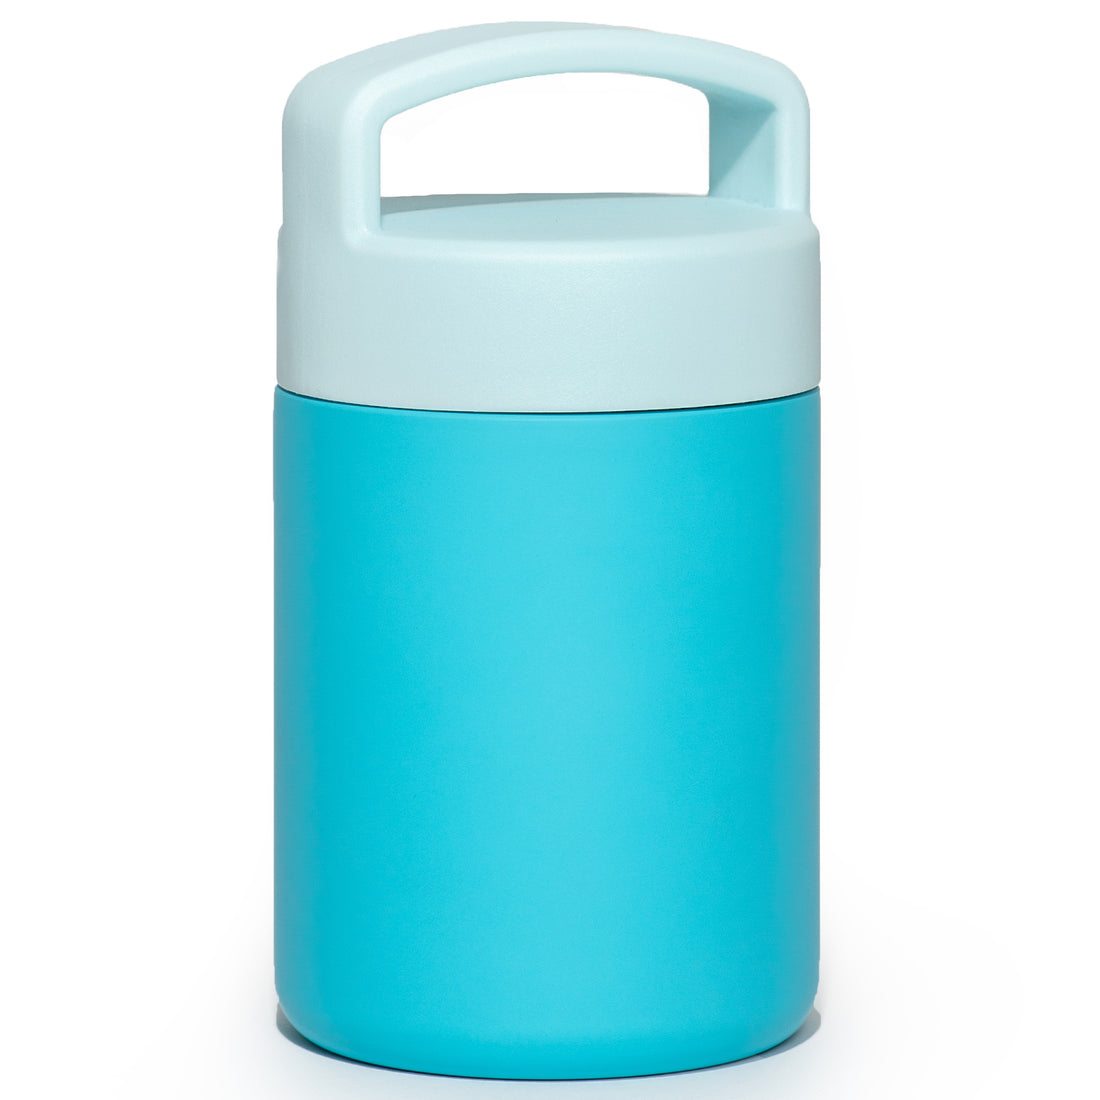 Children's Thermos Cup, Made Of Medical-grade 316l Stainless Steel, 12  Hours Long-lasting Thermal Insulation, 500ml Capacity, With Strap For Easy  Carrying, Back To School Essential.